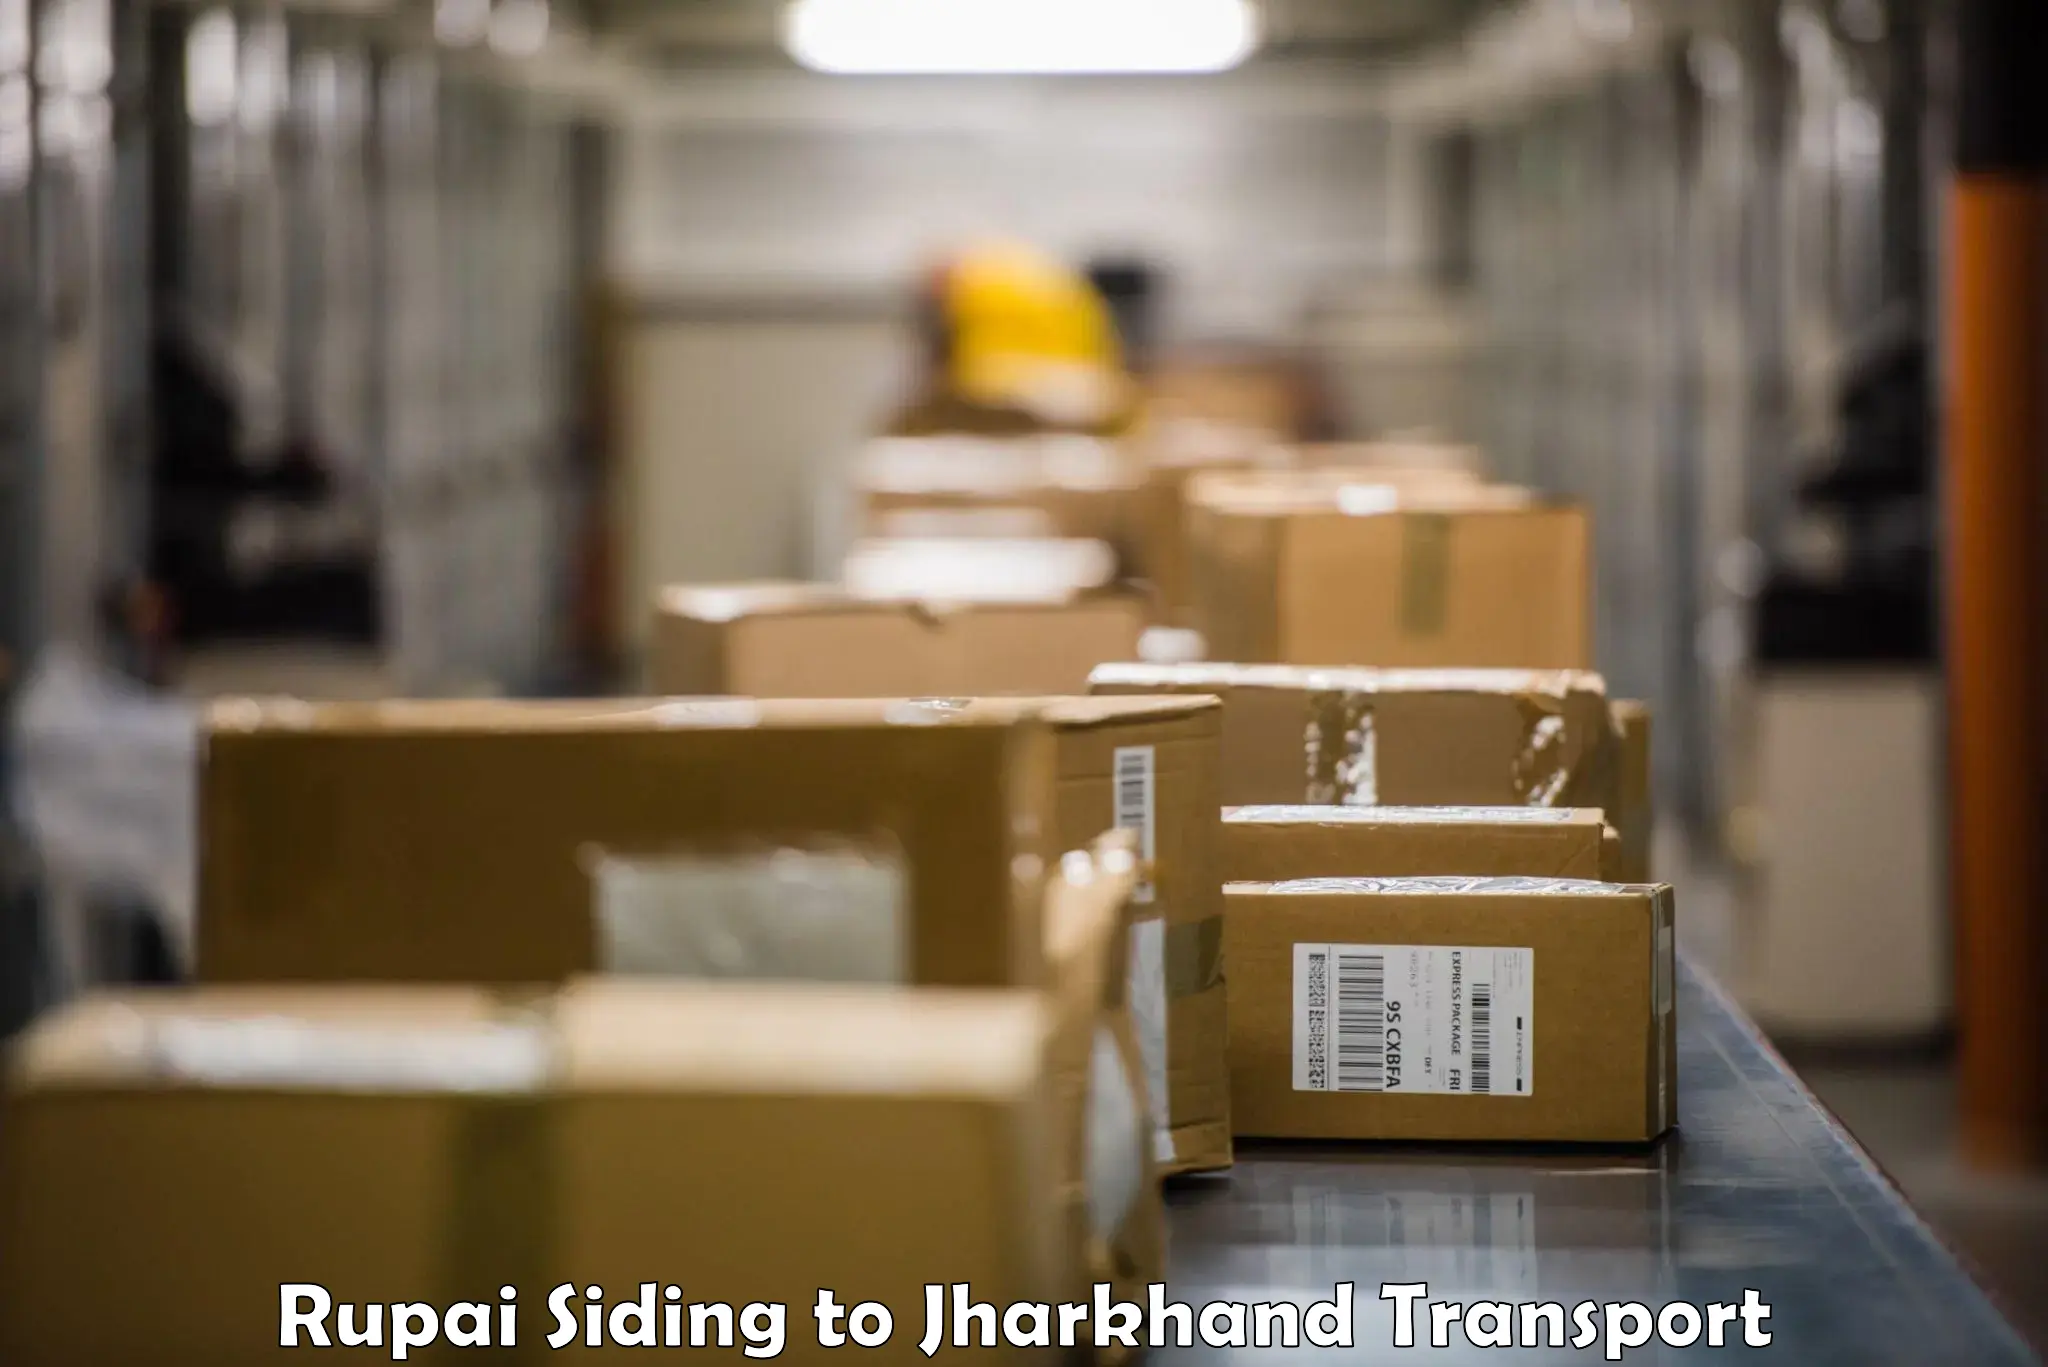 Cargo transport services Rupai Siding to Jamshedpur